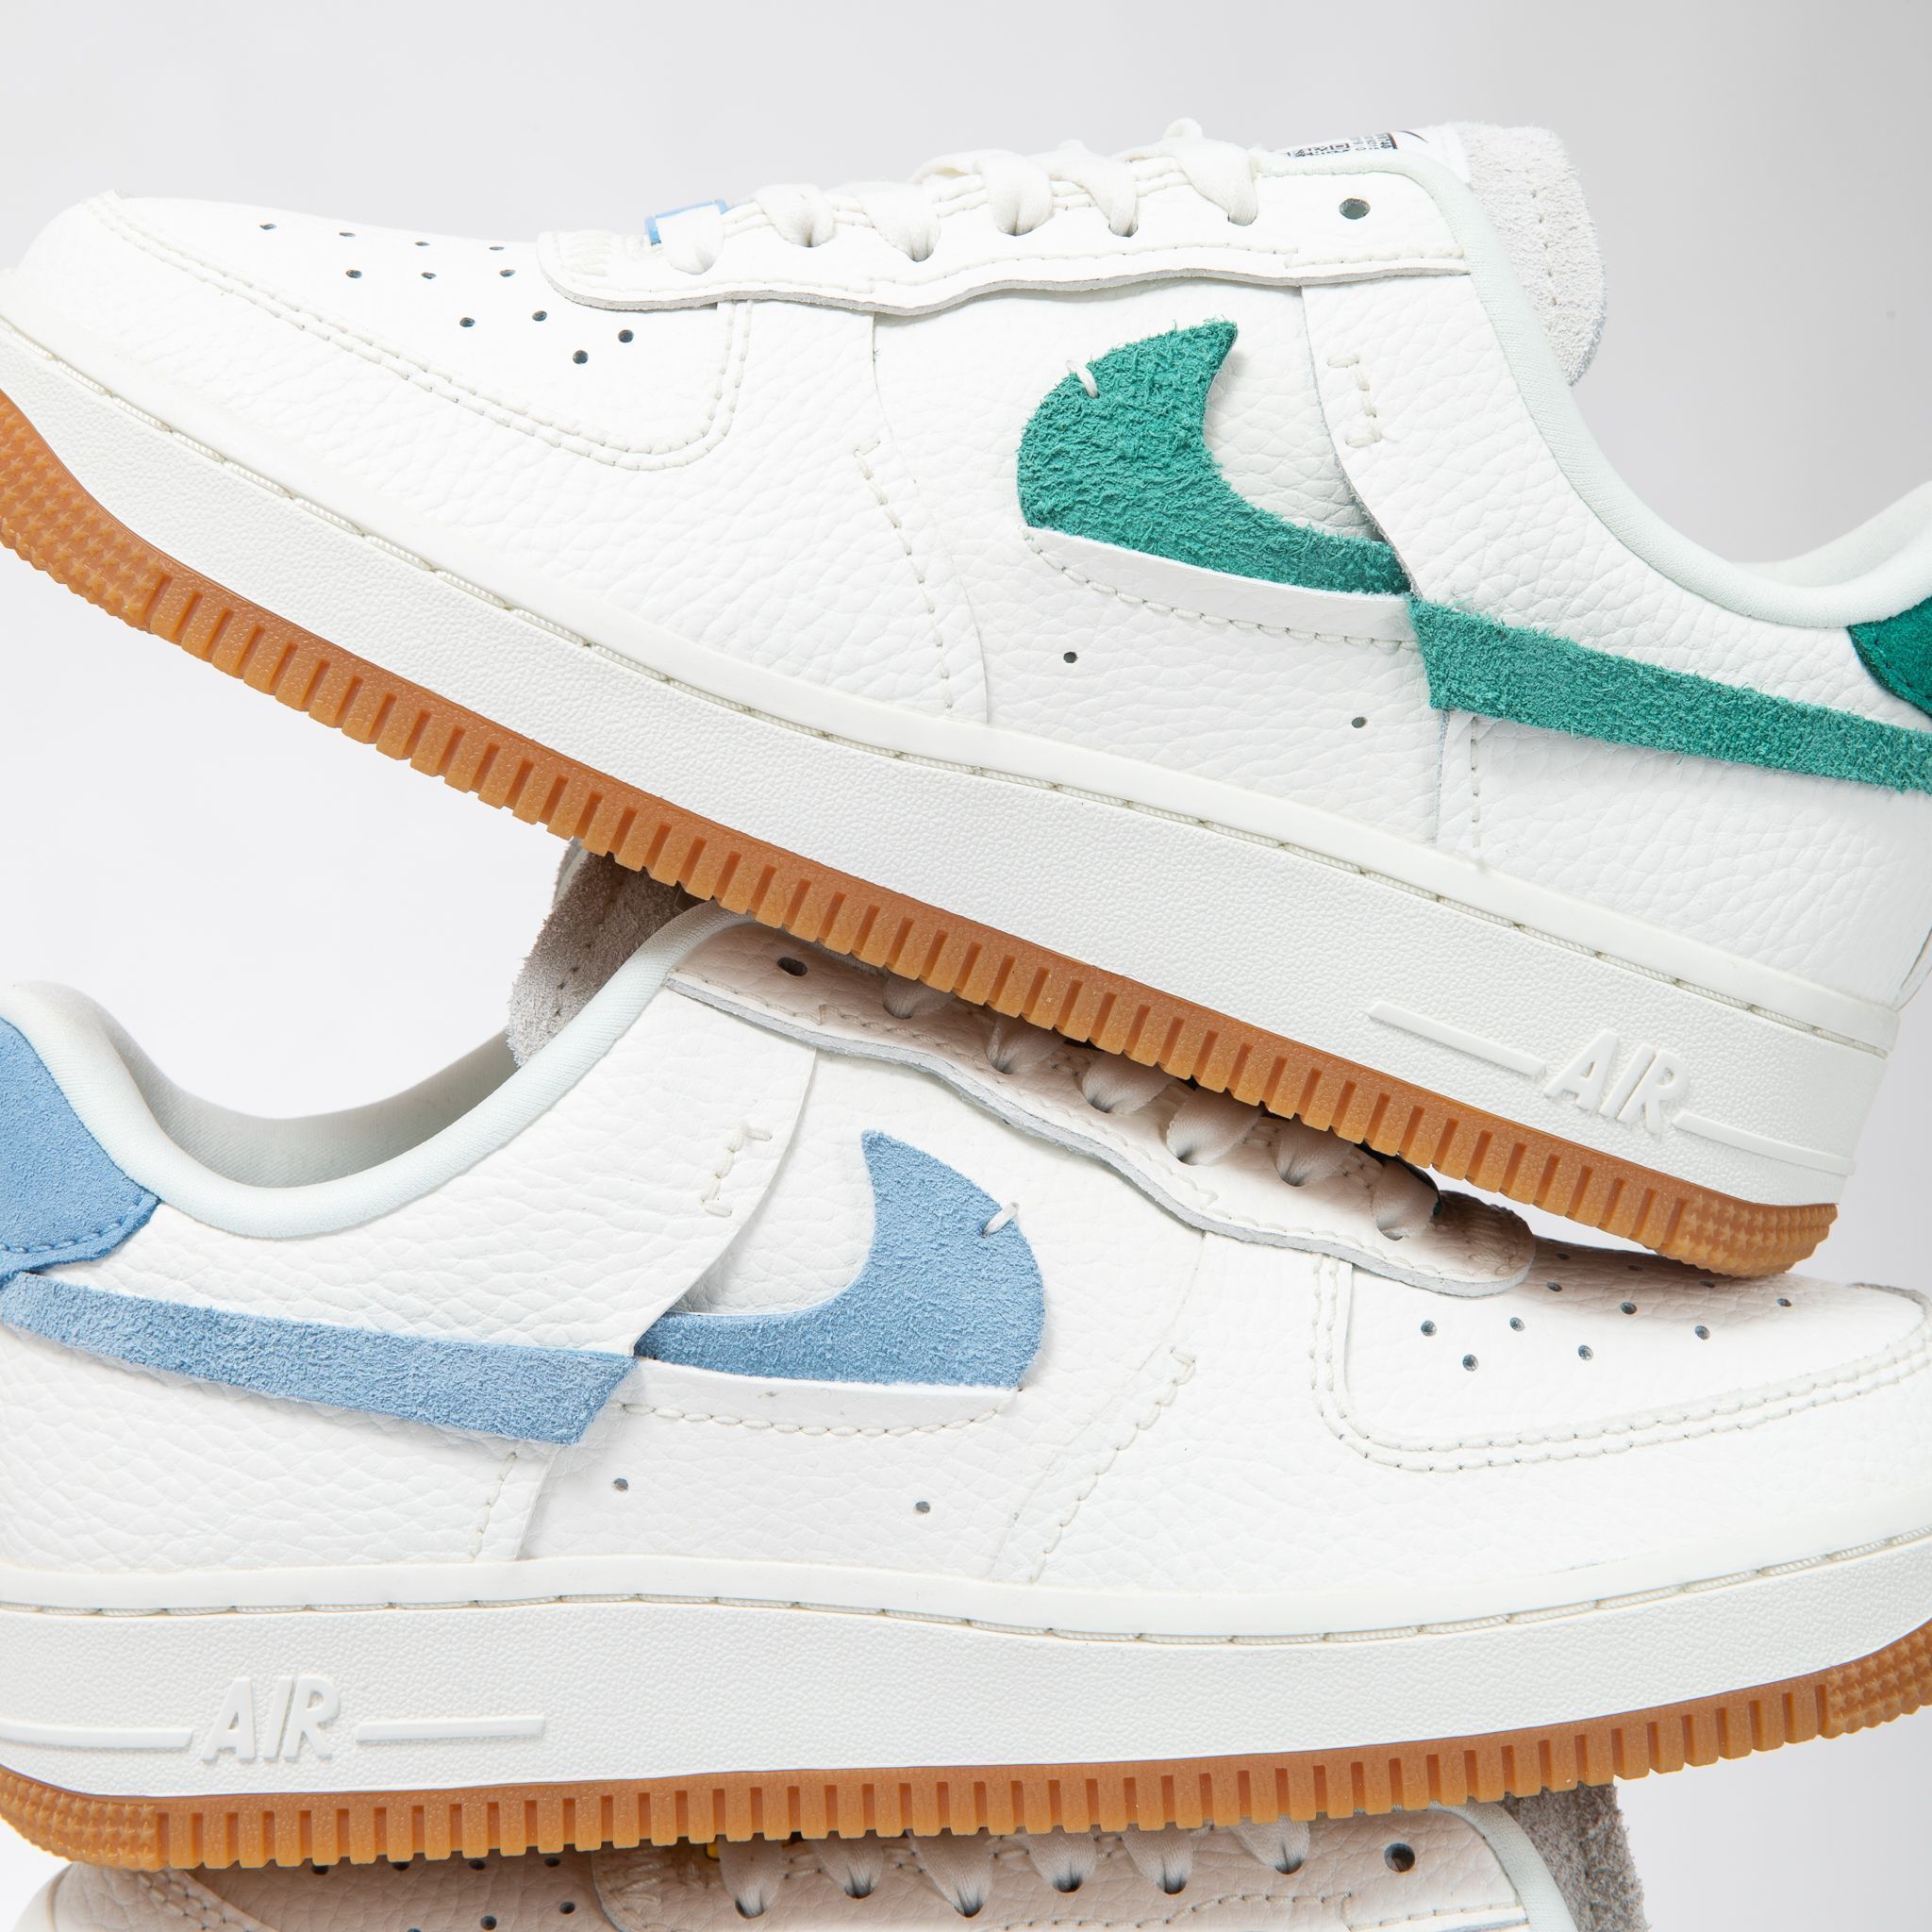 Titolo on X: "#lastSIZES🔥 2 vandalized Wmns Air Force Ones in "Sail" Hurry  Up ➡️ https://t.co/3QRnzmm161 sizerun 💃 US 5.5 (36) - US 9.5 (41) style  code 🔎 BV0740-101 and BV0740-100 #af1 #